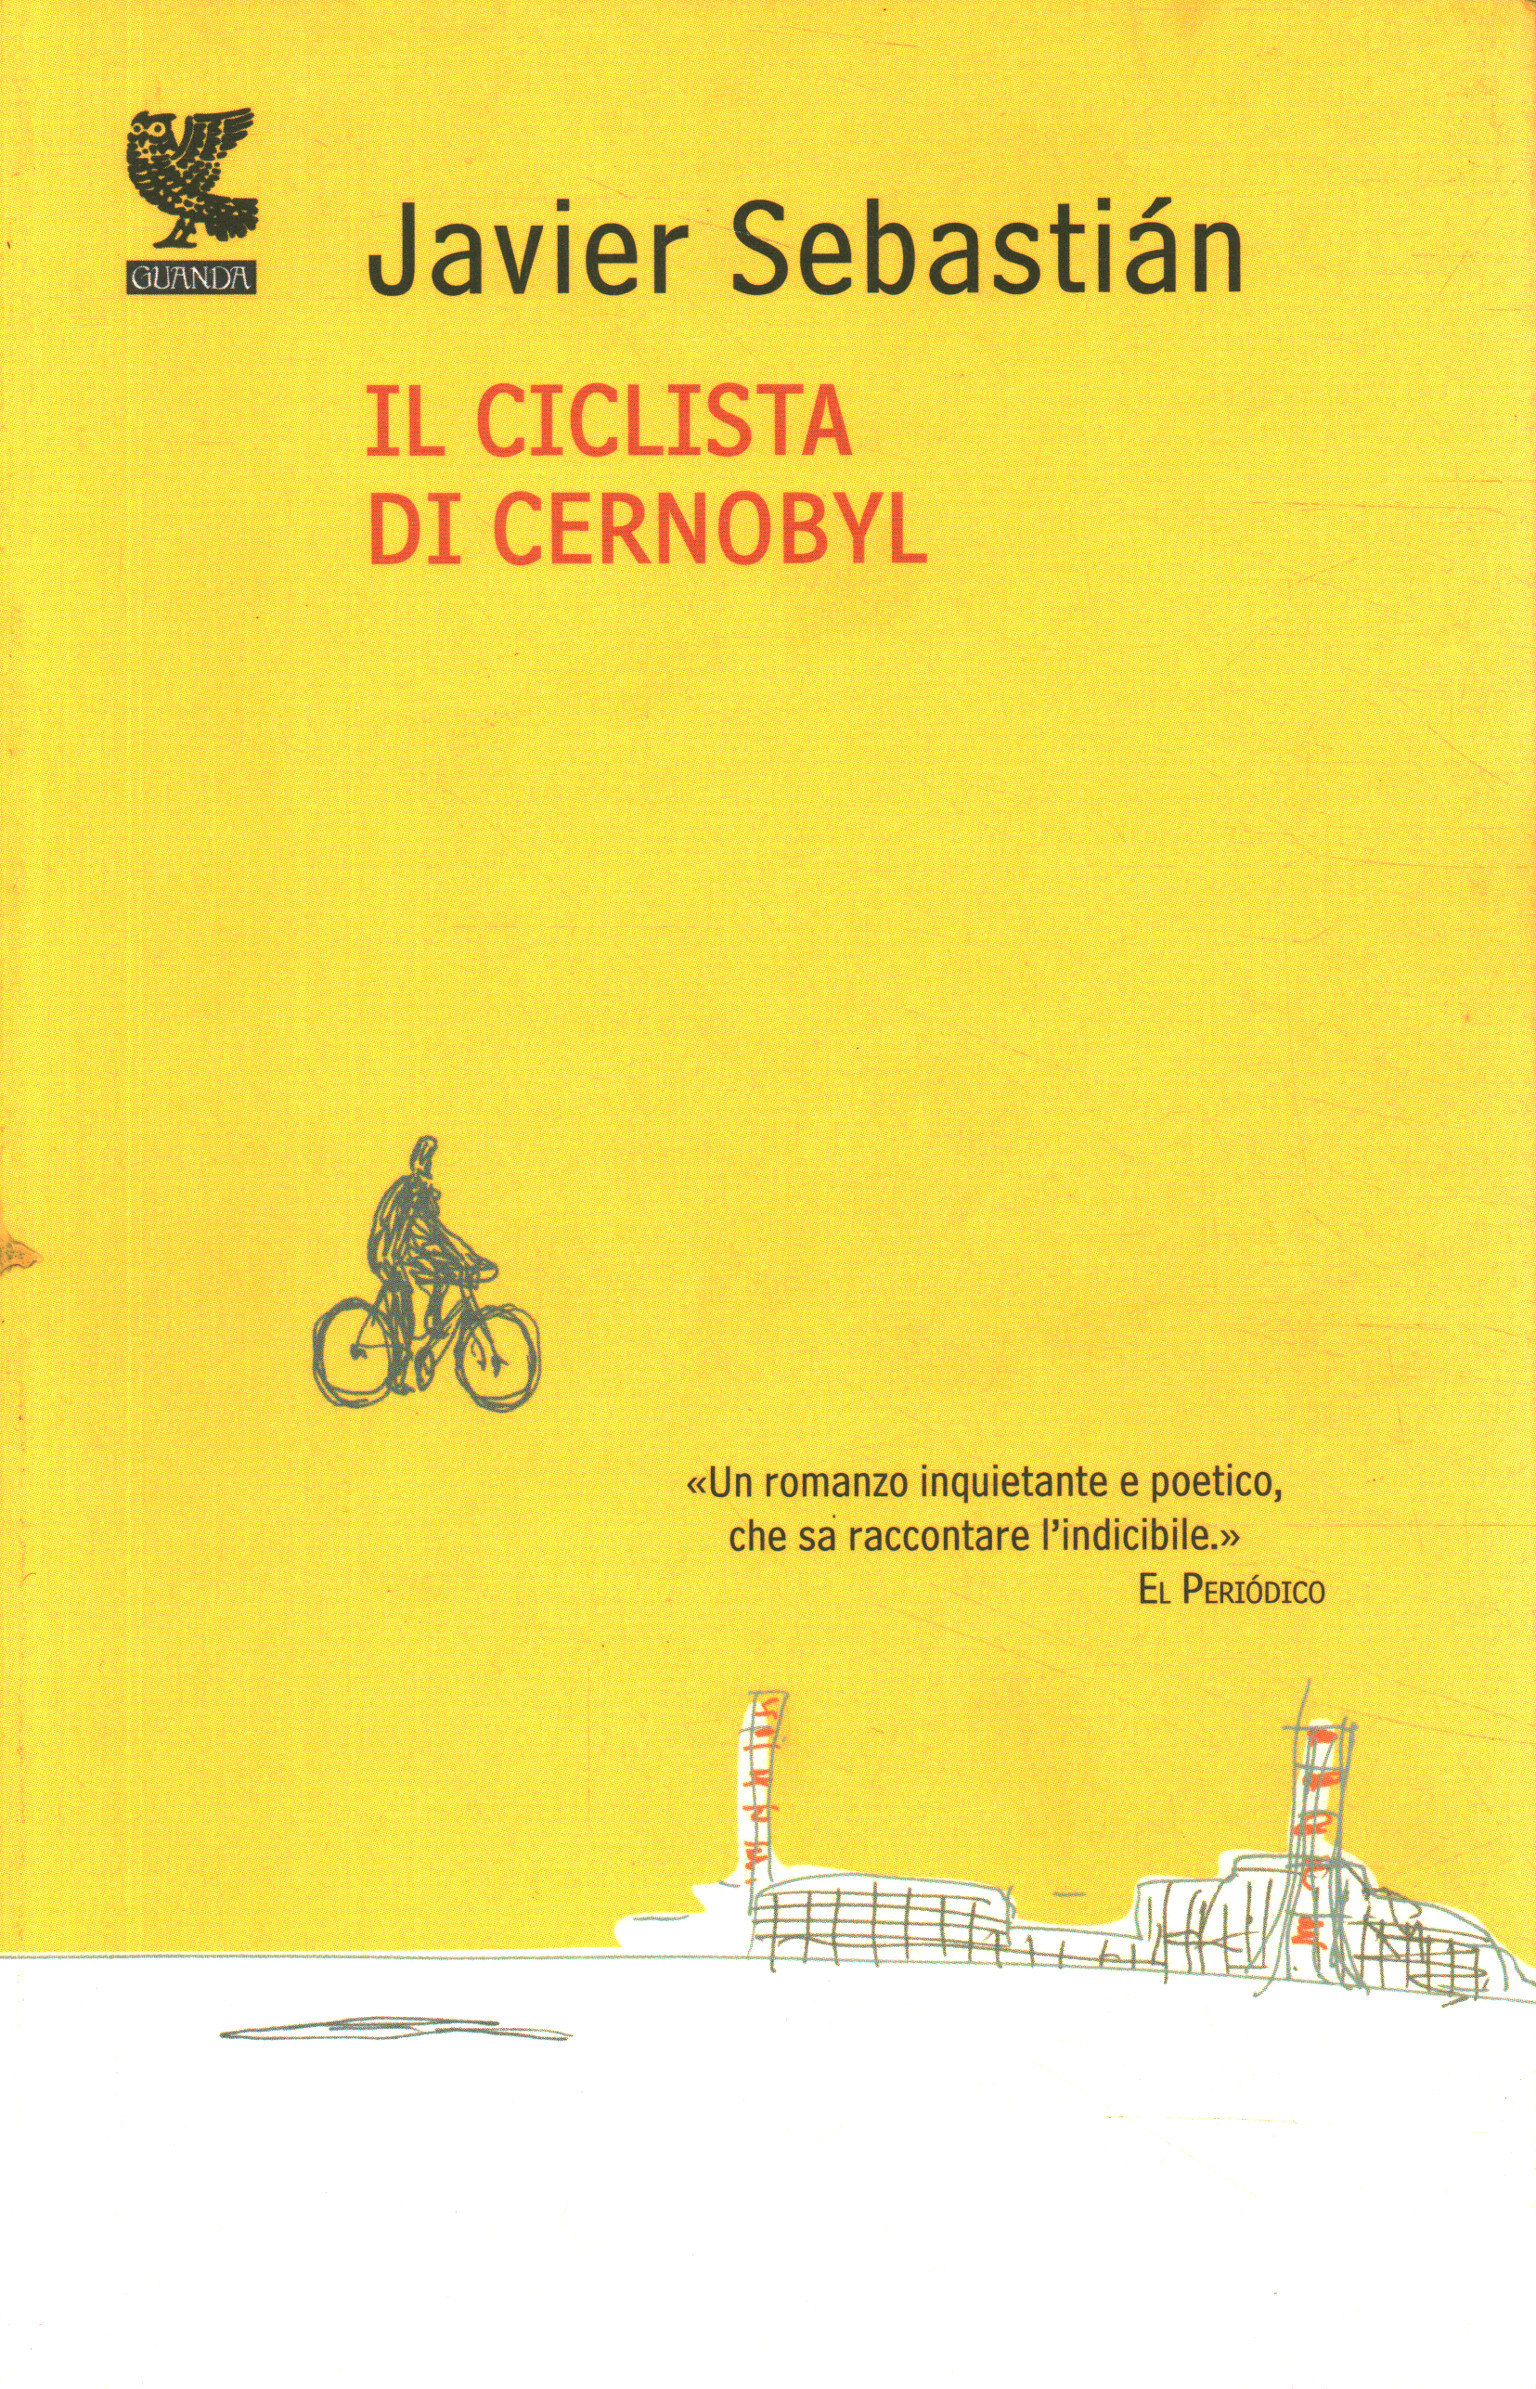 The cyclist from Chernobyl